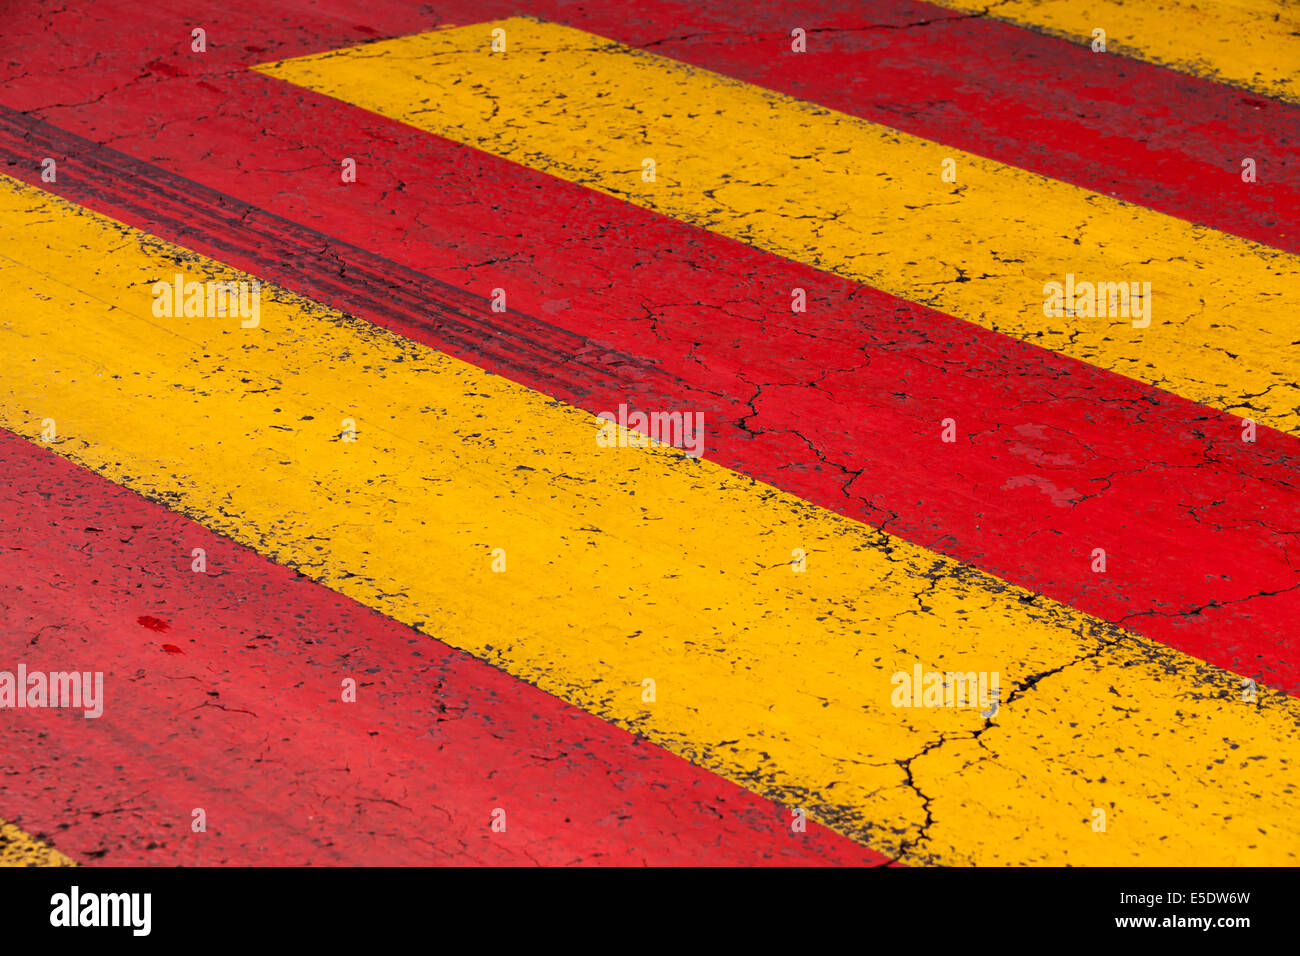 Pedestrian crossing road marking with yellow and red lines Stock Photo